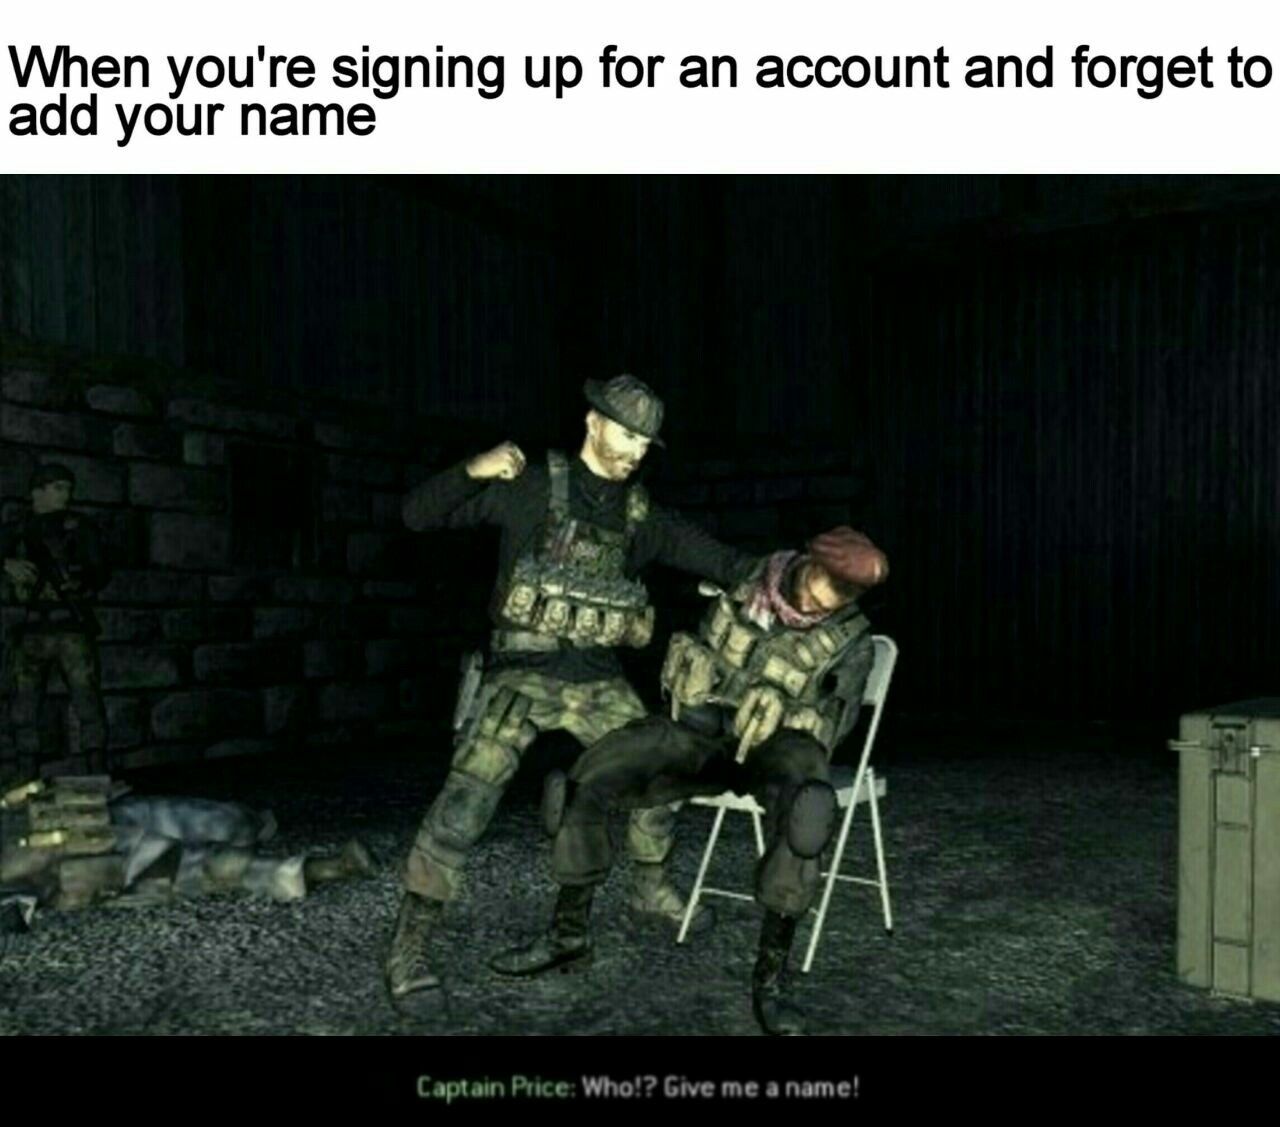 Meme about captain Price torturing a guy to give him a name.